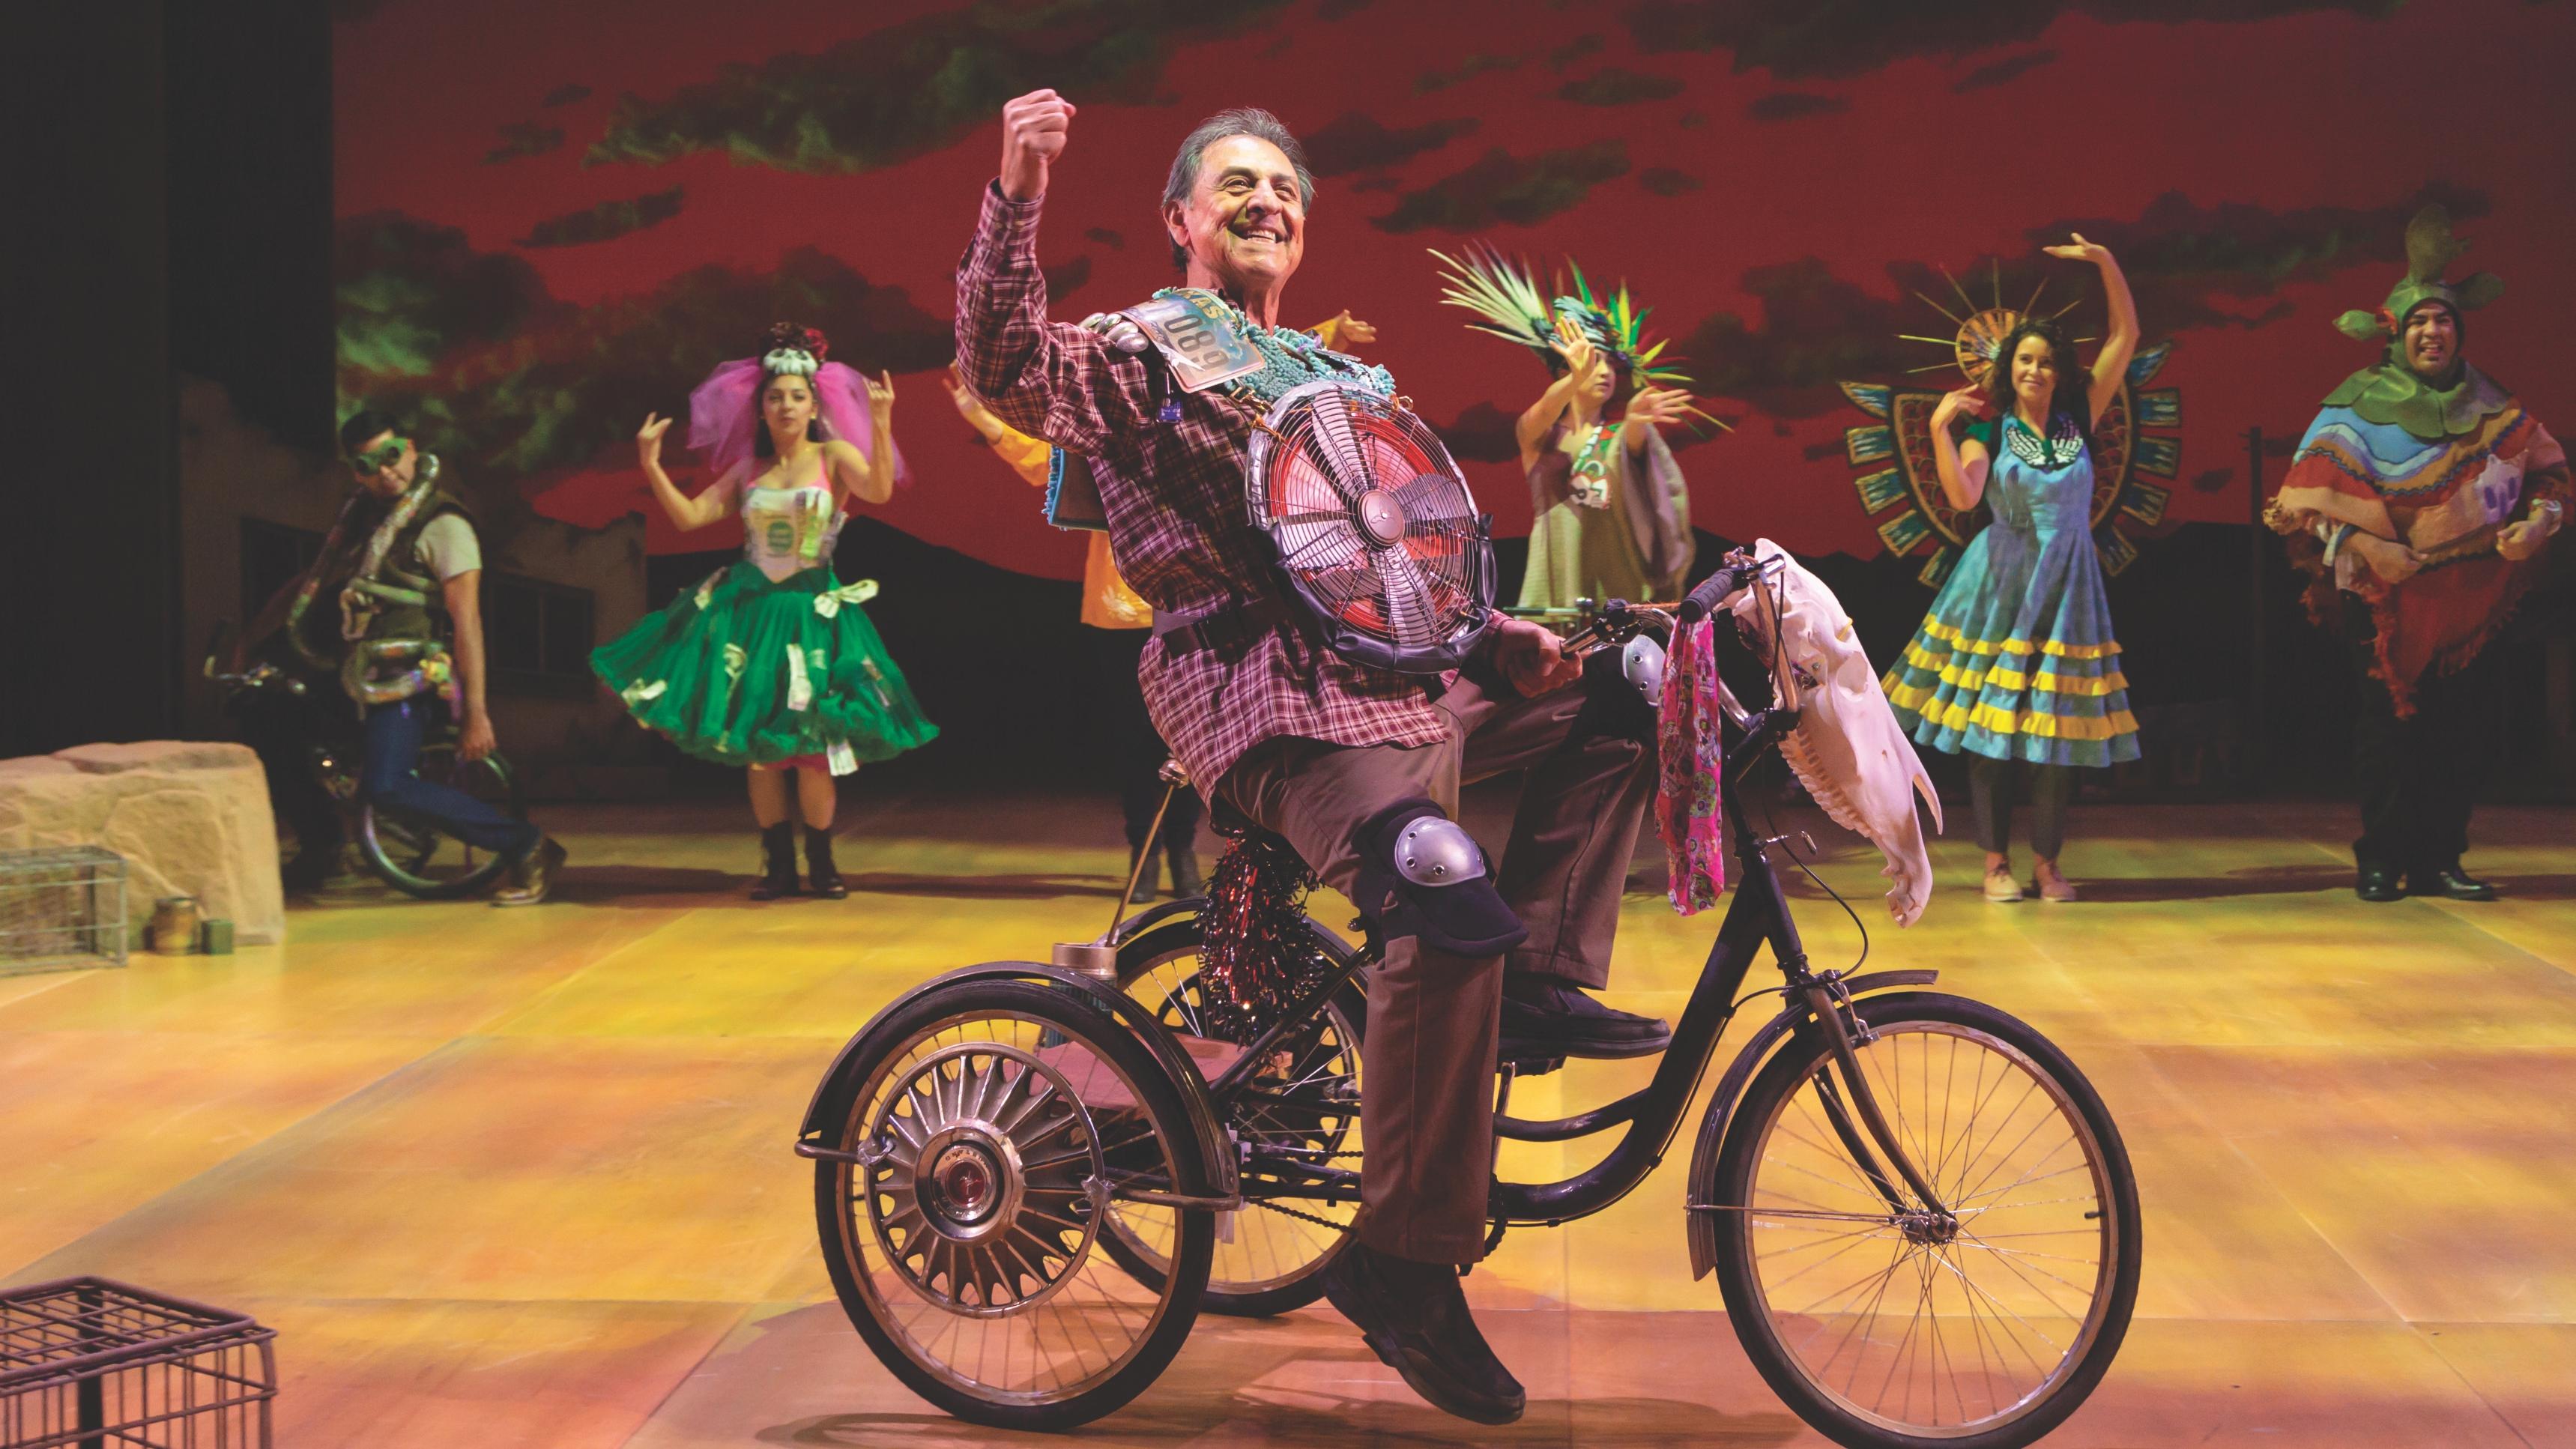 A man in costume riding a bike on stage indoors